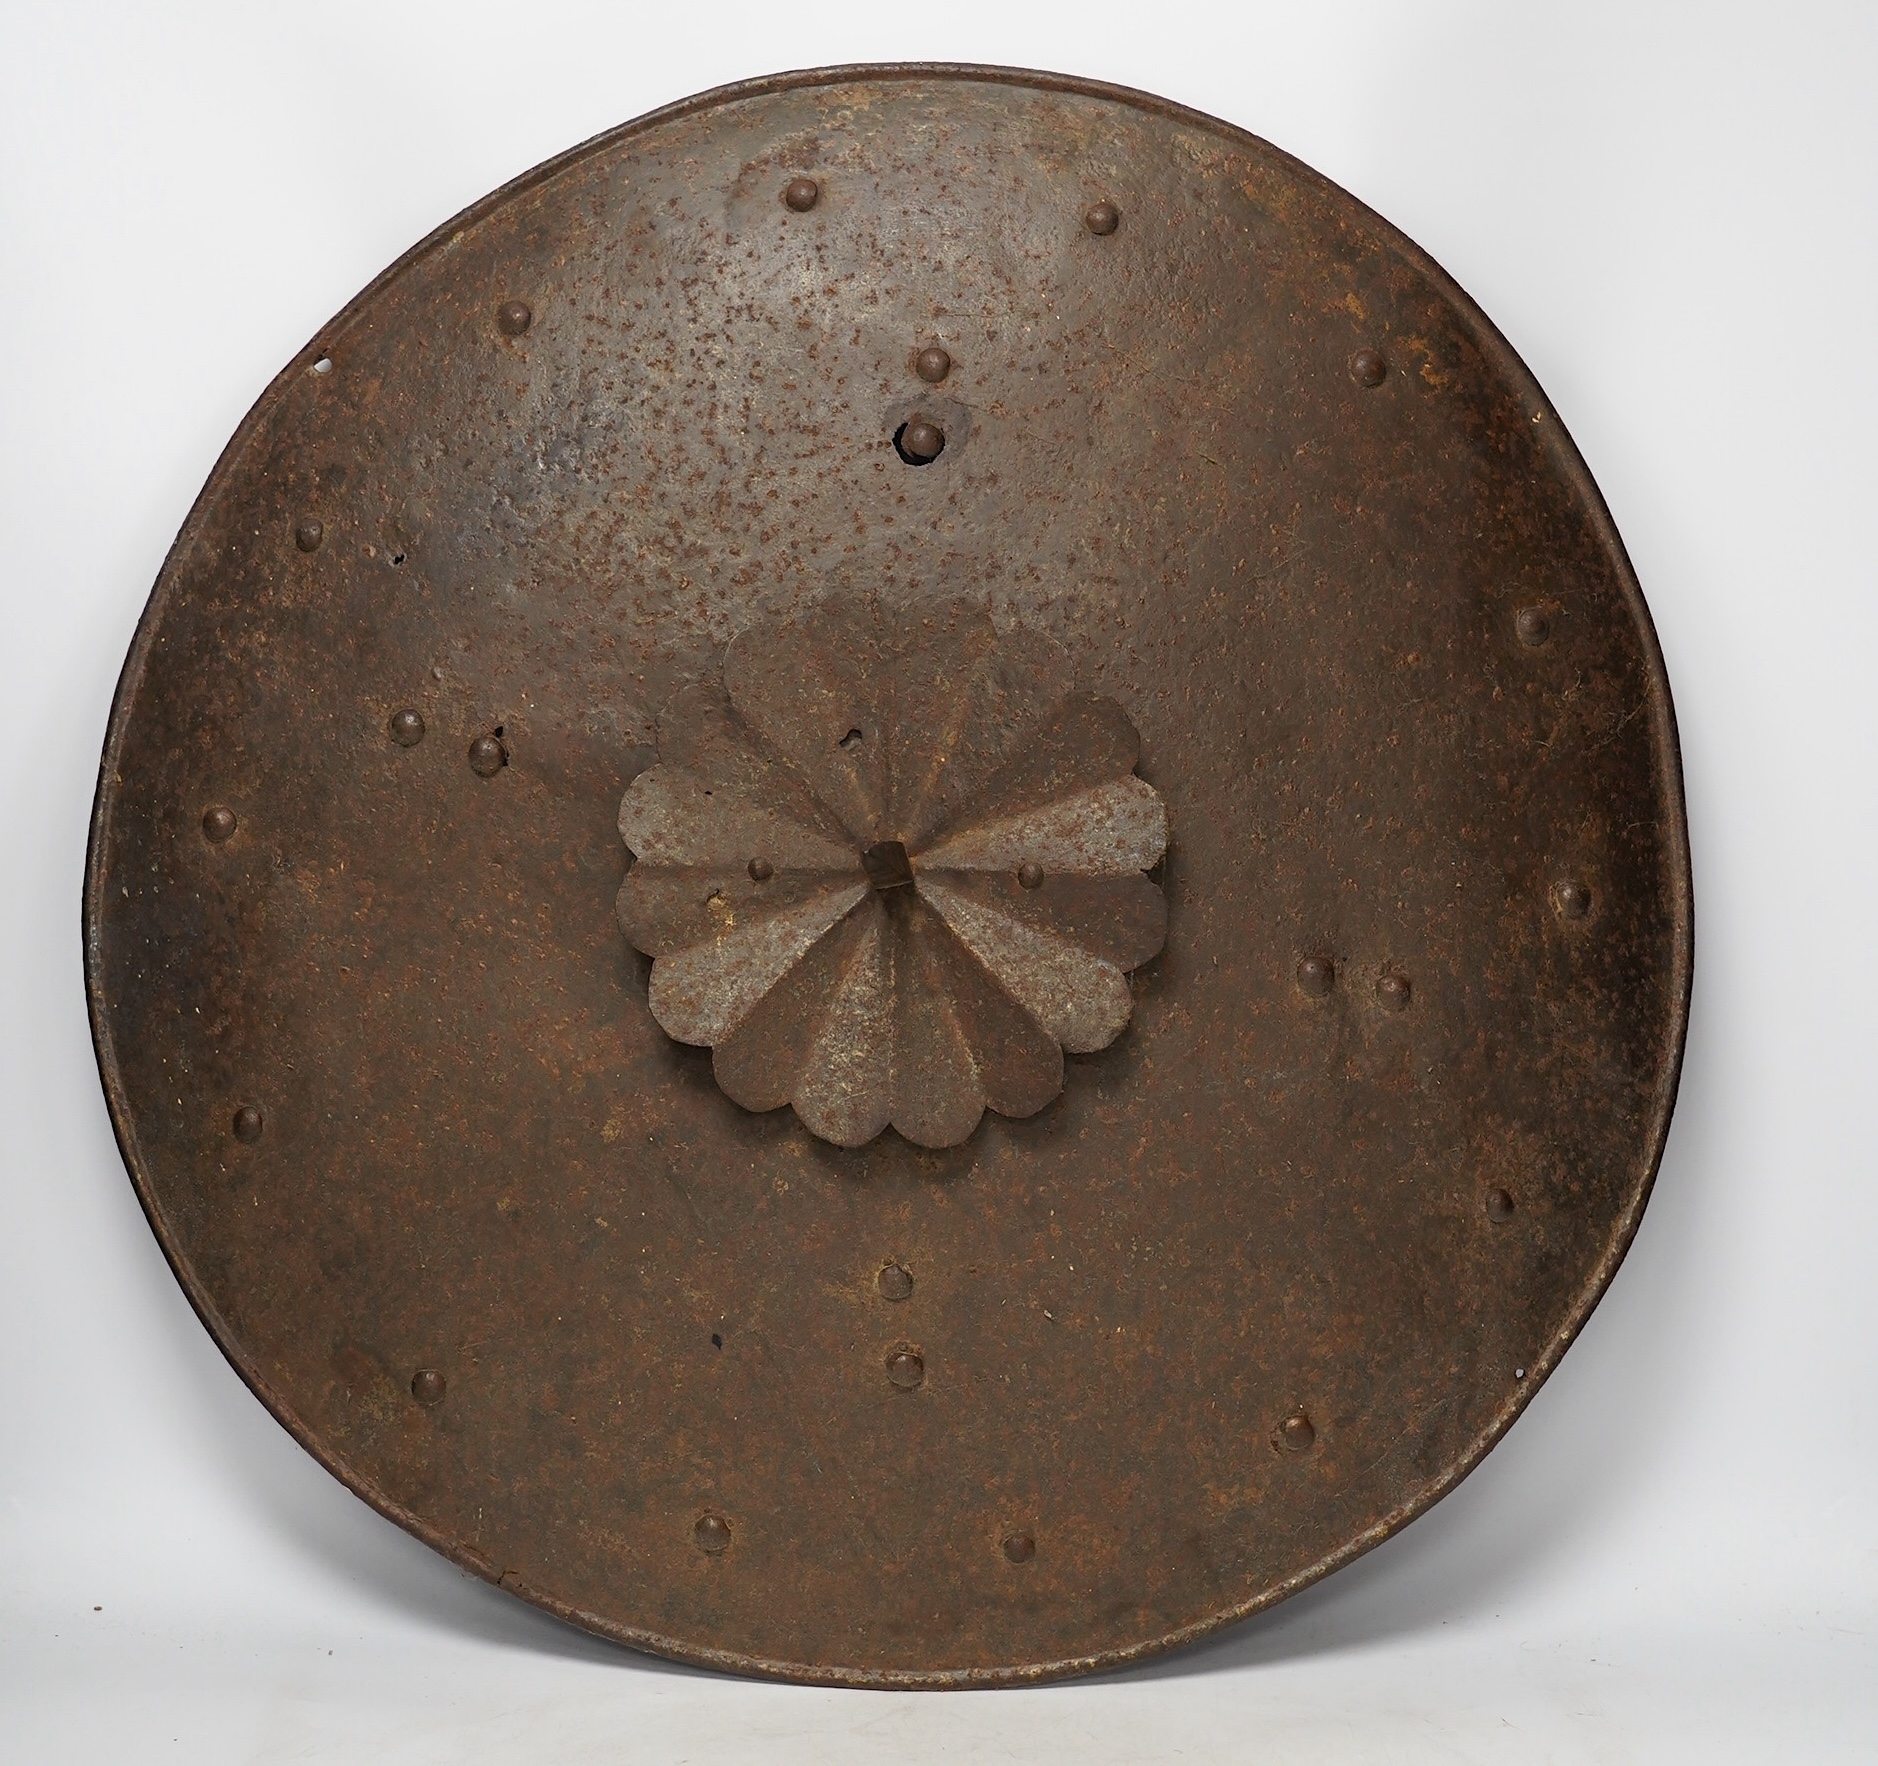 A 19th century iron shield with centre spike, formally part of a suit of armour, diameter 57.5cm. Condition - poor, surface rust and pitting overall.